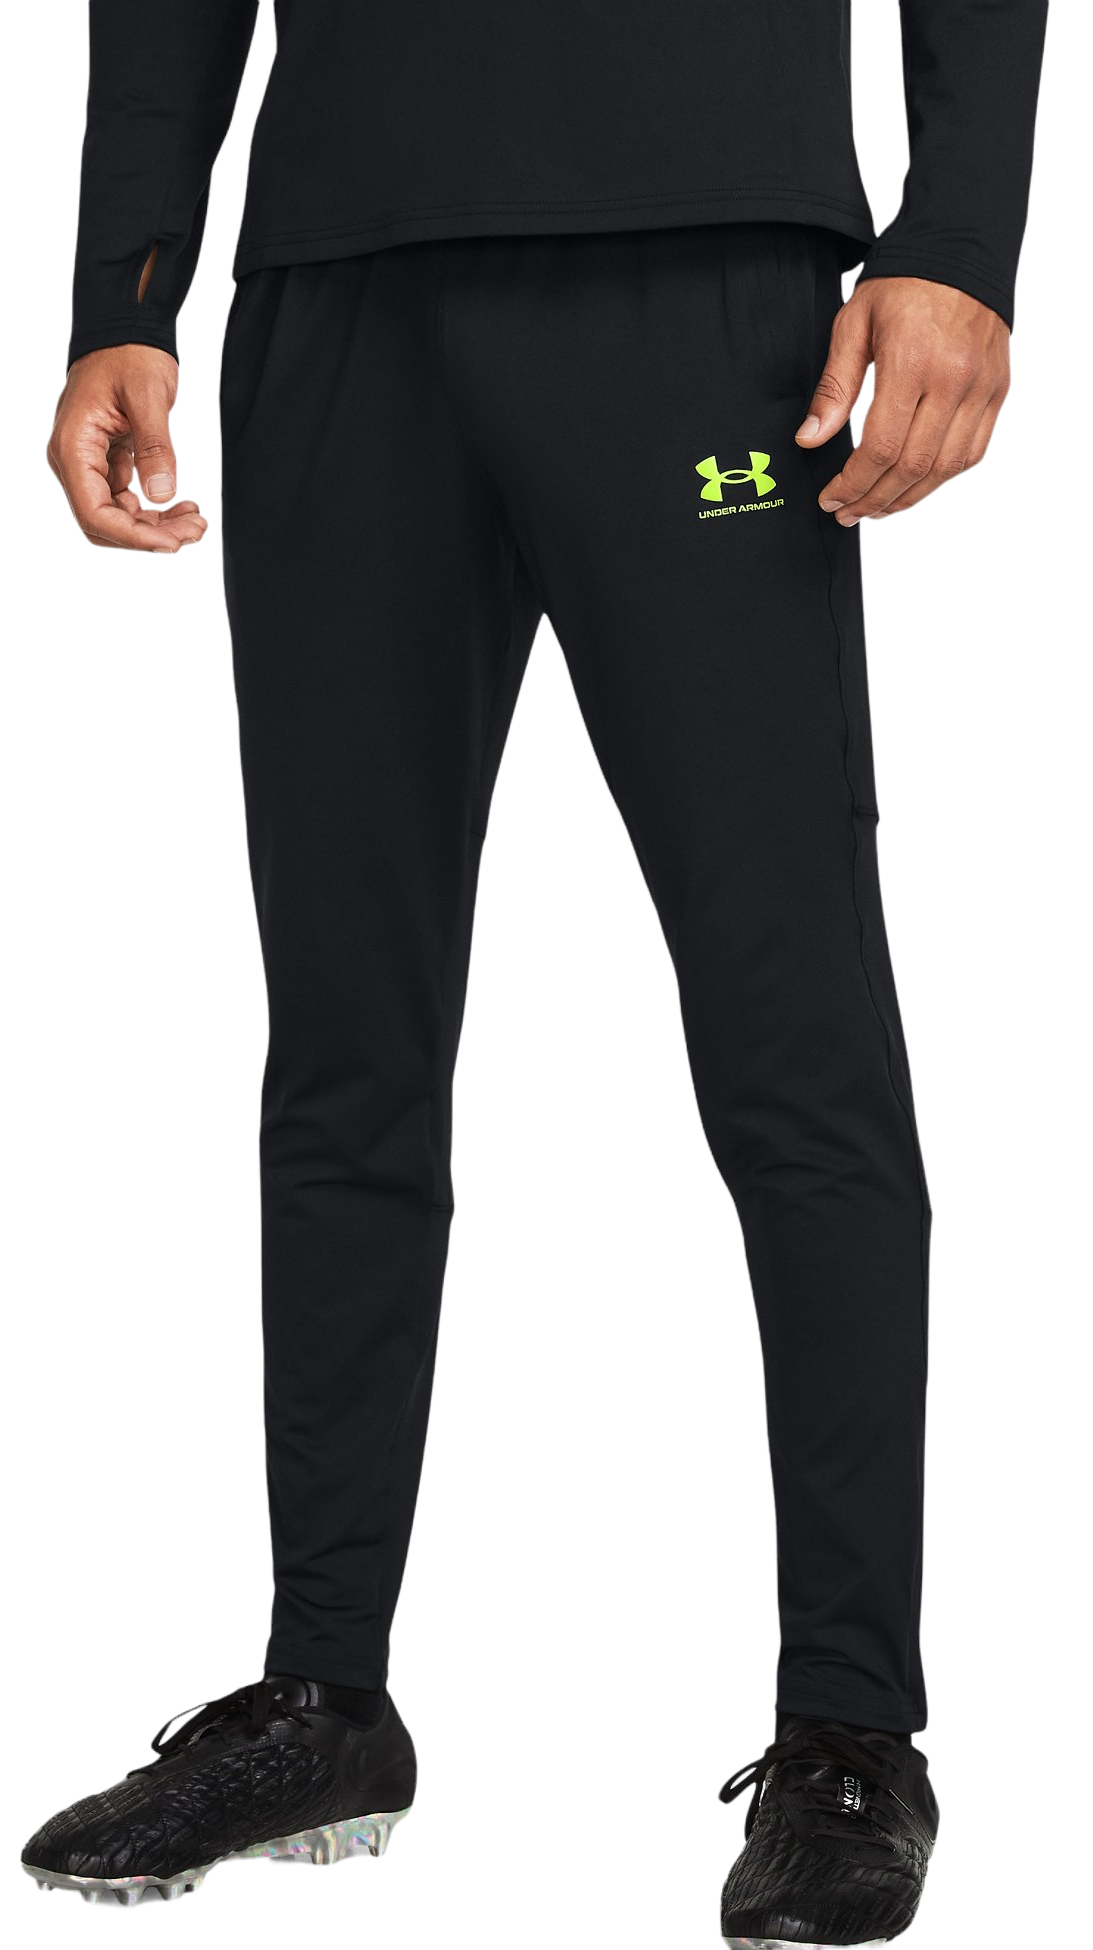 Pants Under Armour Challenger 